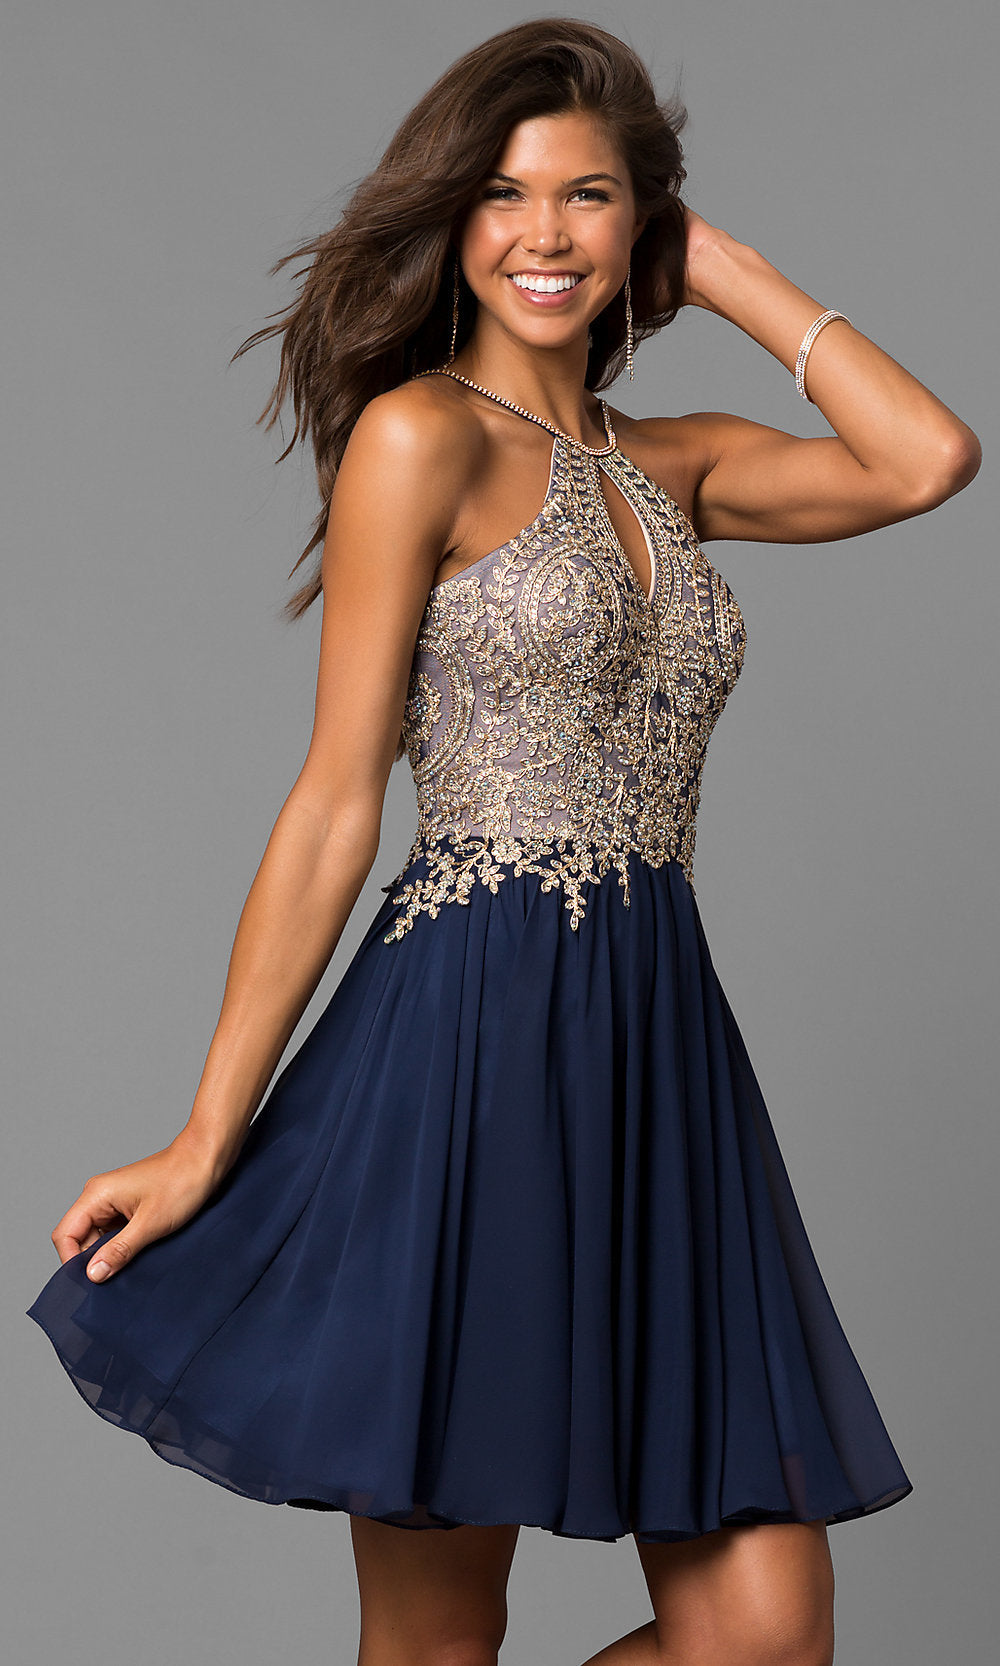 Short High-Neck Dave and Johnny Homecoming Dress